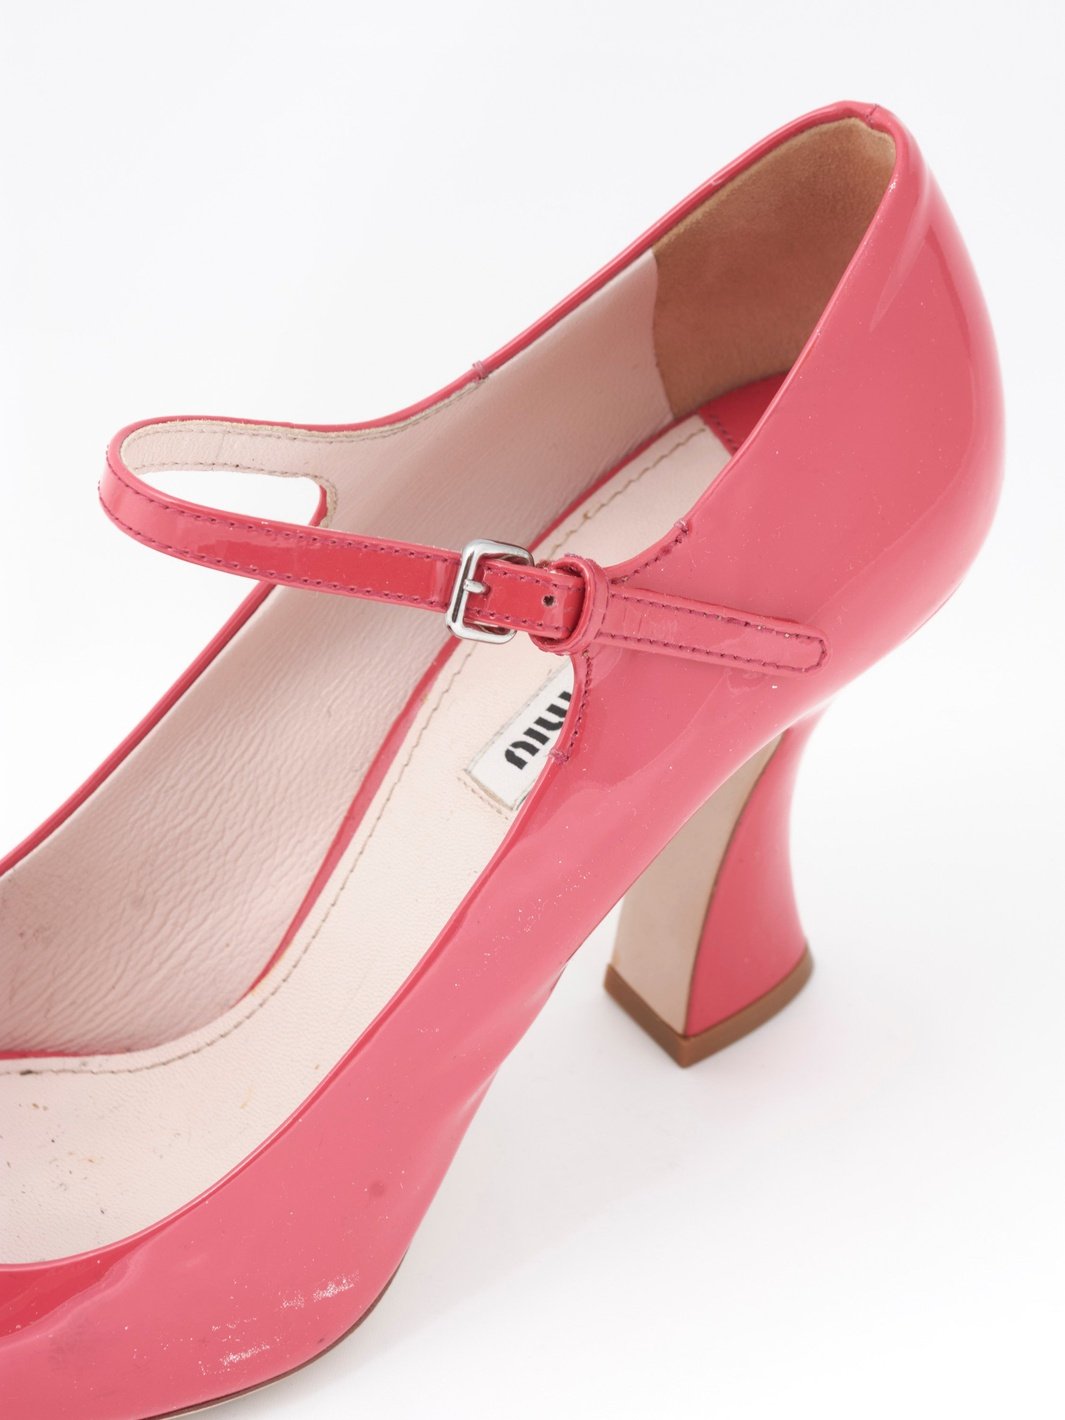 2010 Miu Miu Mary Janes in cherry colored patent leather